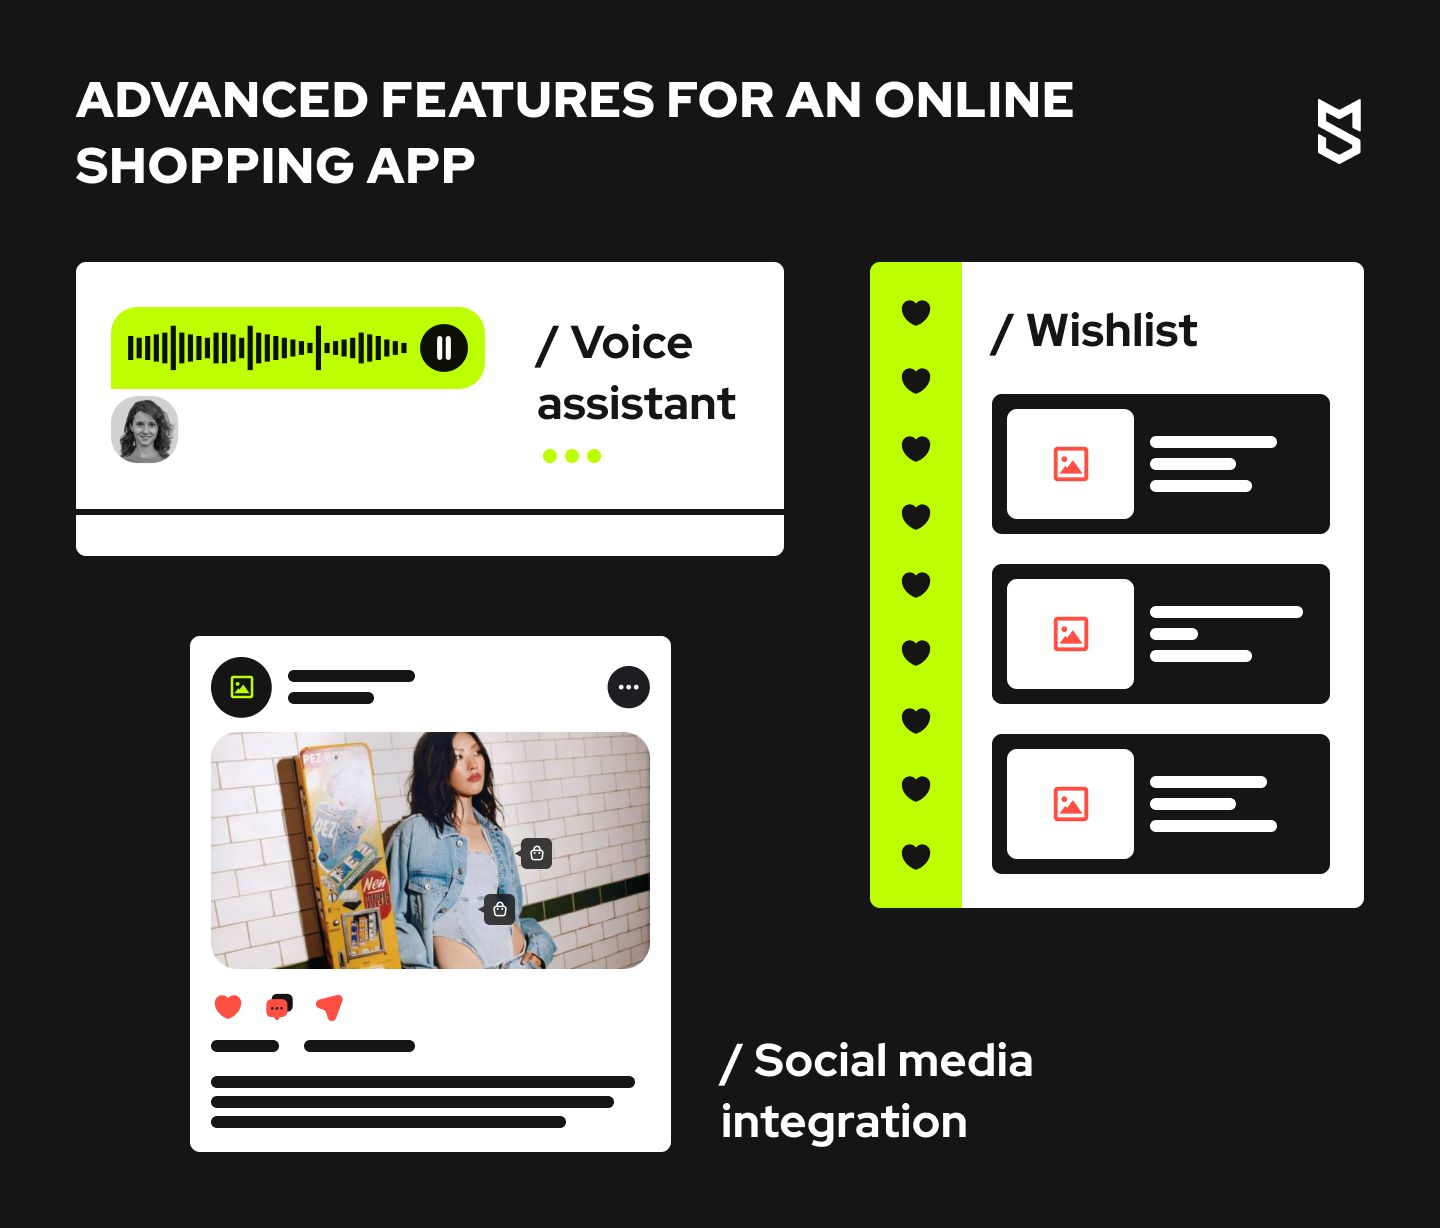 Advanced features for an online shopping app